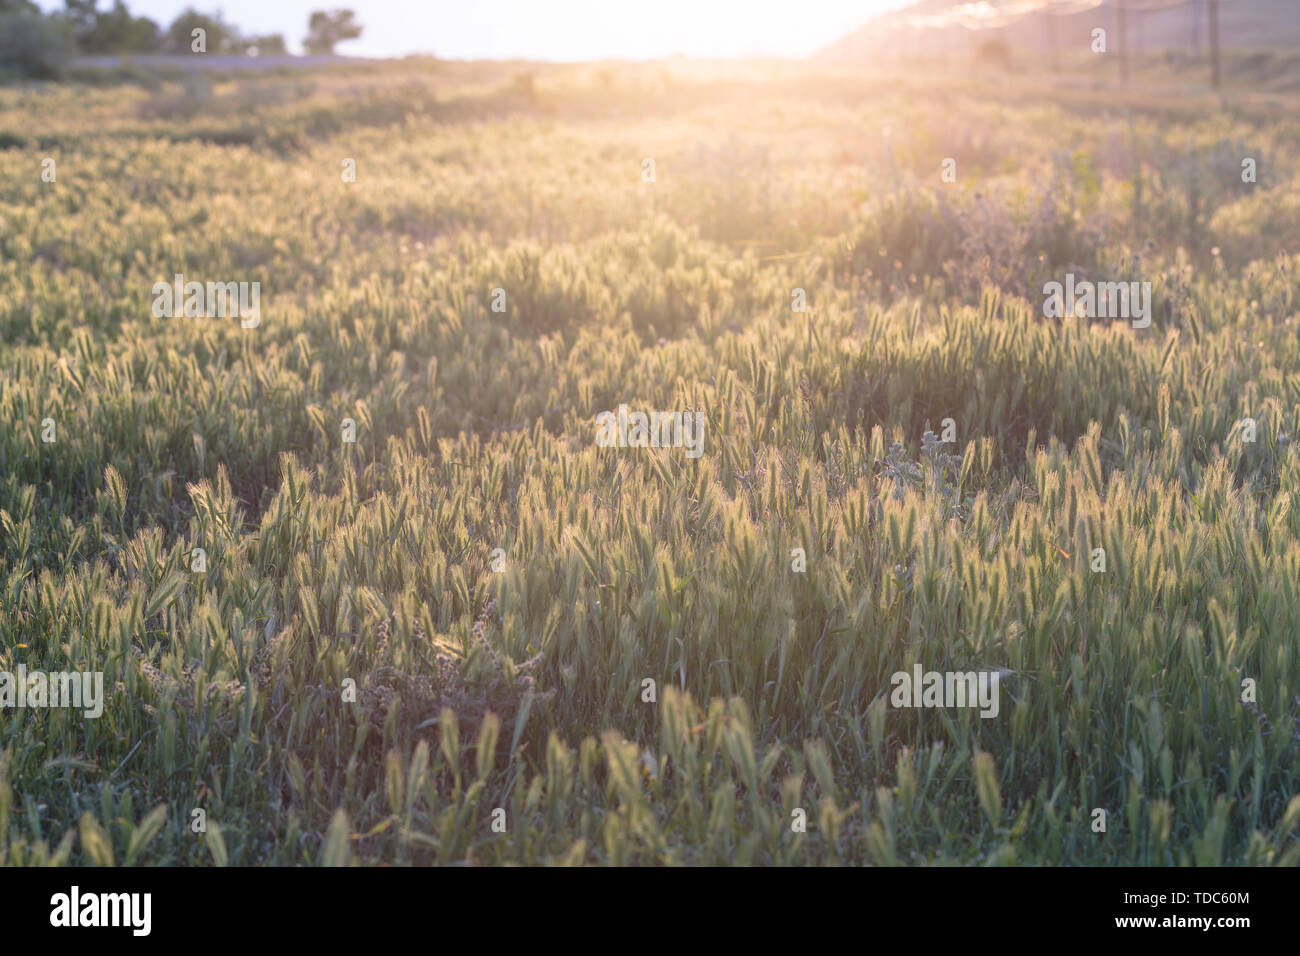 photo of a blooming field with vegetation in warm colors Stock Photo